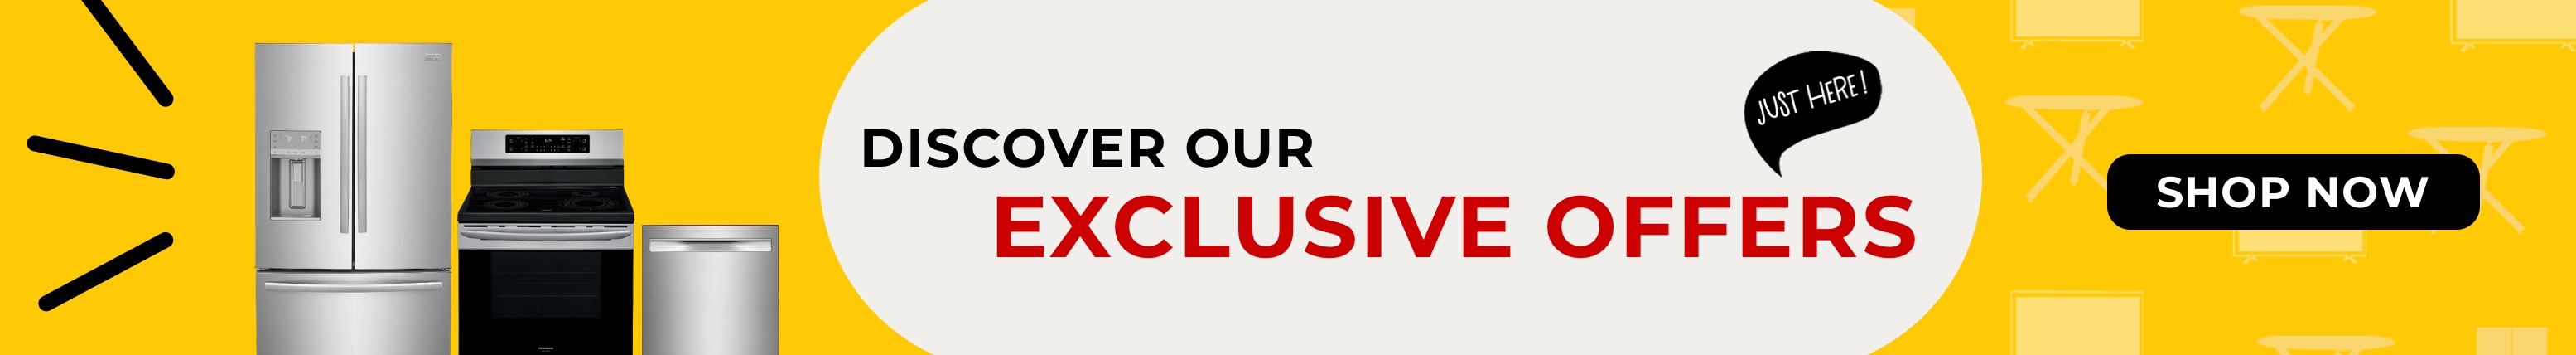 Discover our exclusive offers.